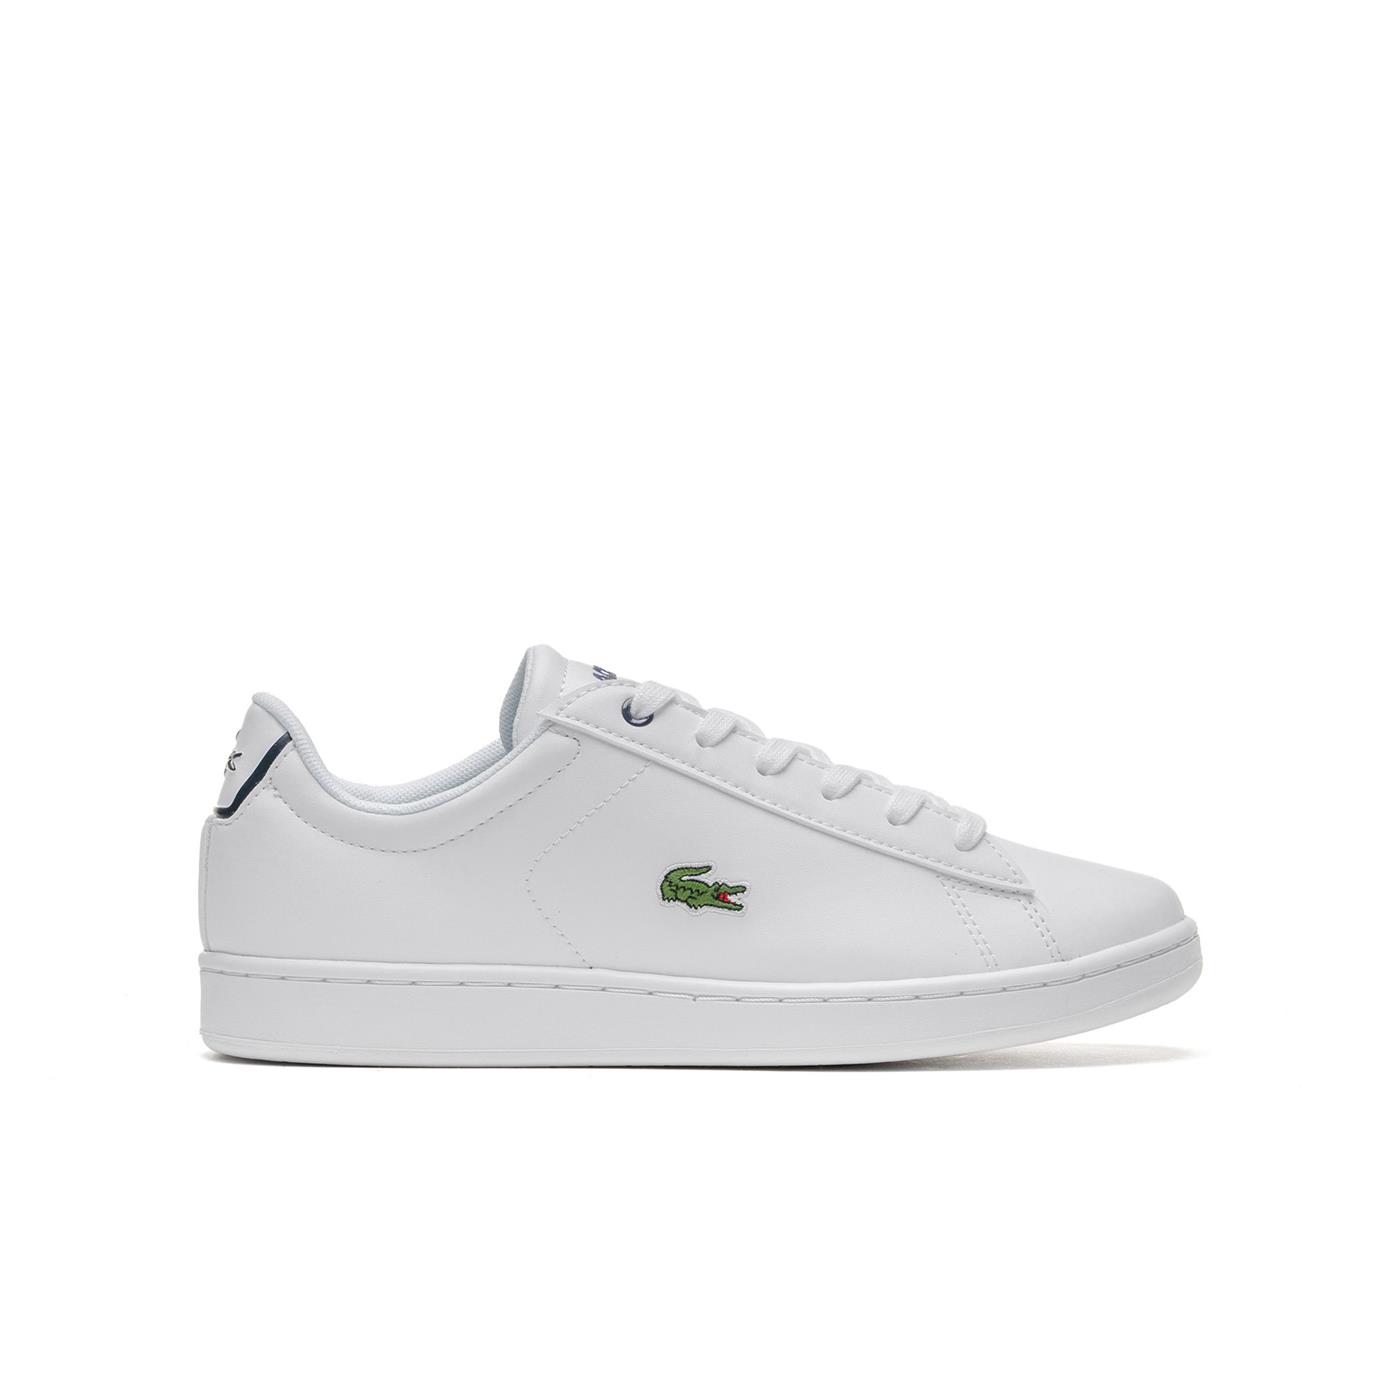 Sneakers LACOSTE Carnaby Evo BL White for Junior | 33SPJ1003-042 ...